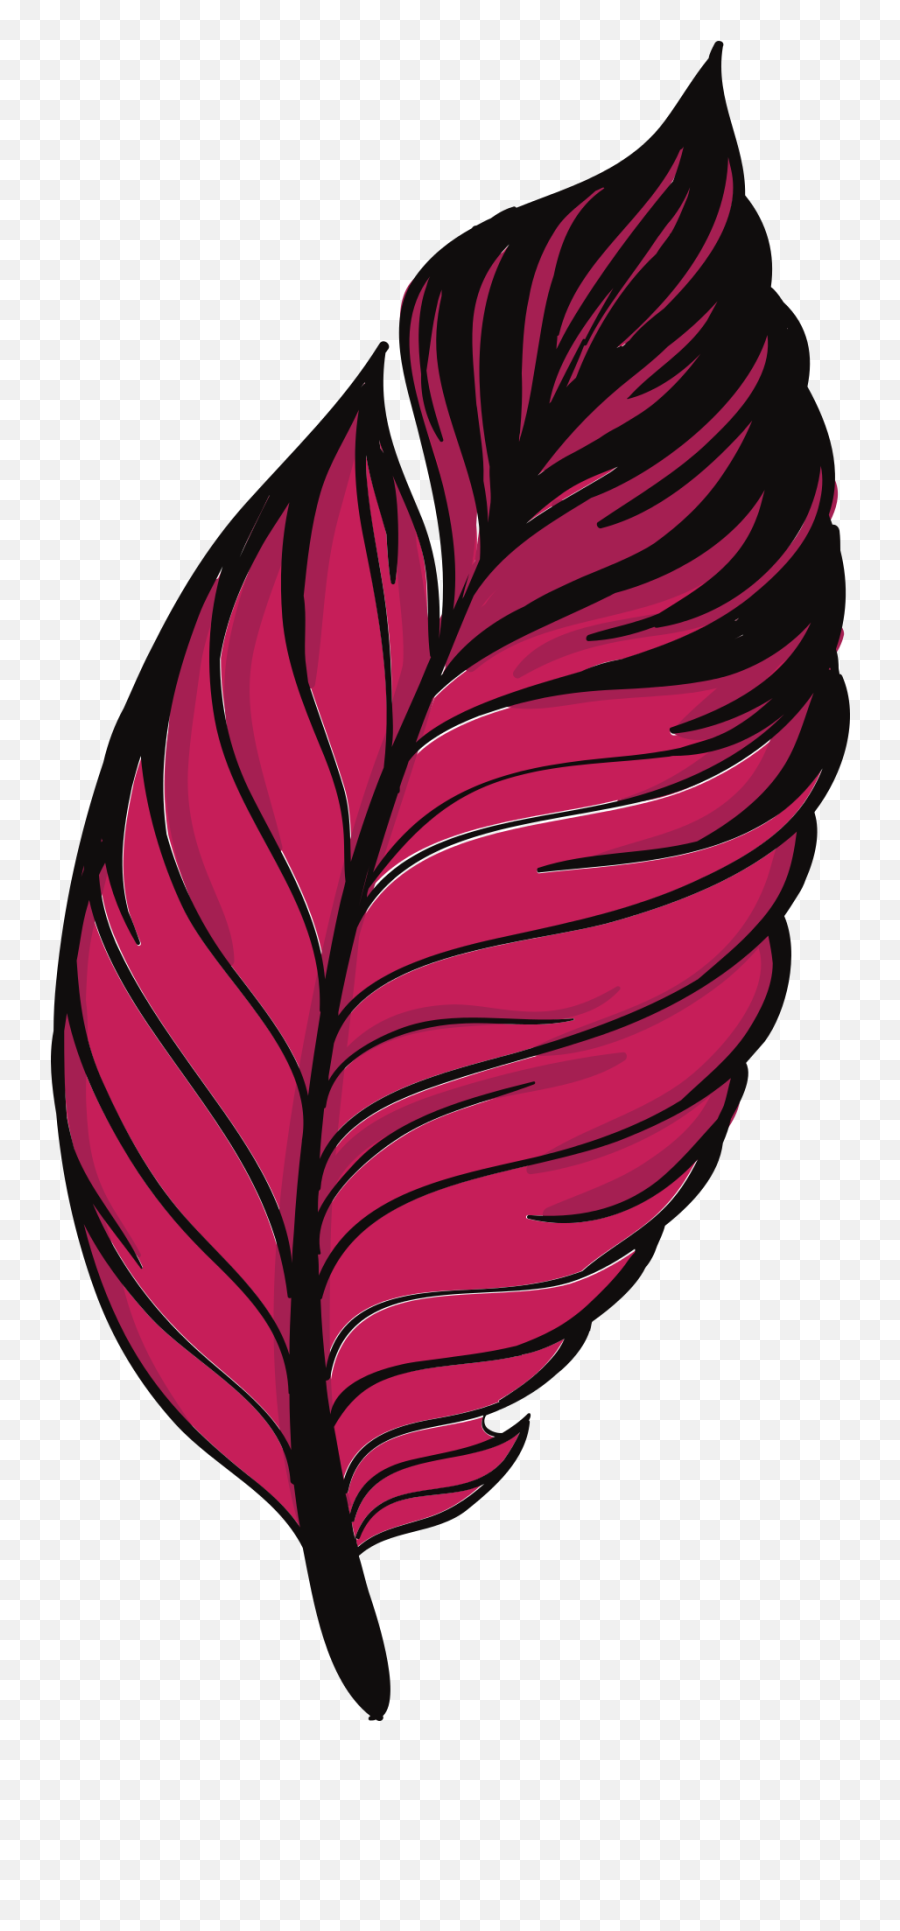 Painted Crimson Feather Of Pigeon - Feather Transparent Png Vektor Bulu Burung Png Emoji,Turkey Feathers Clipart